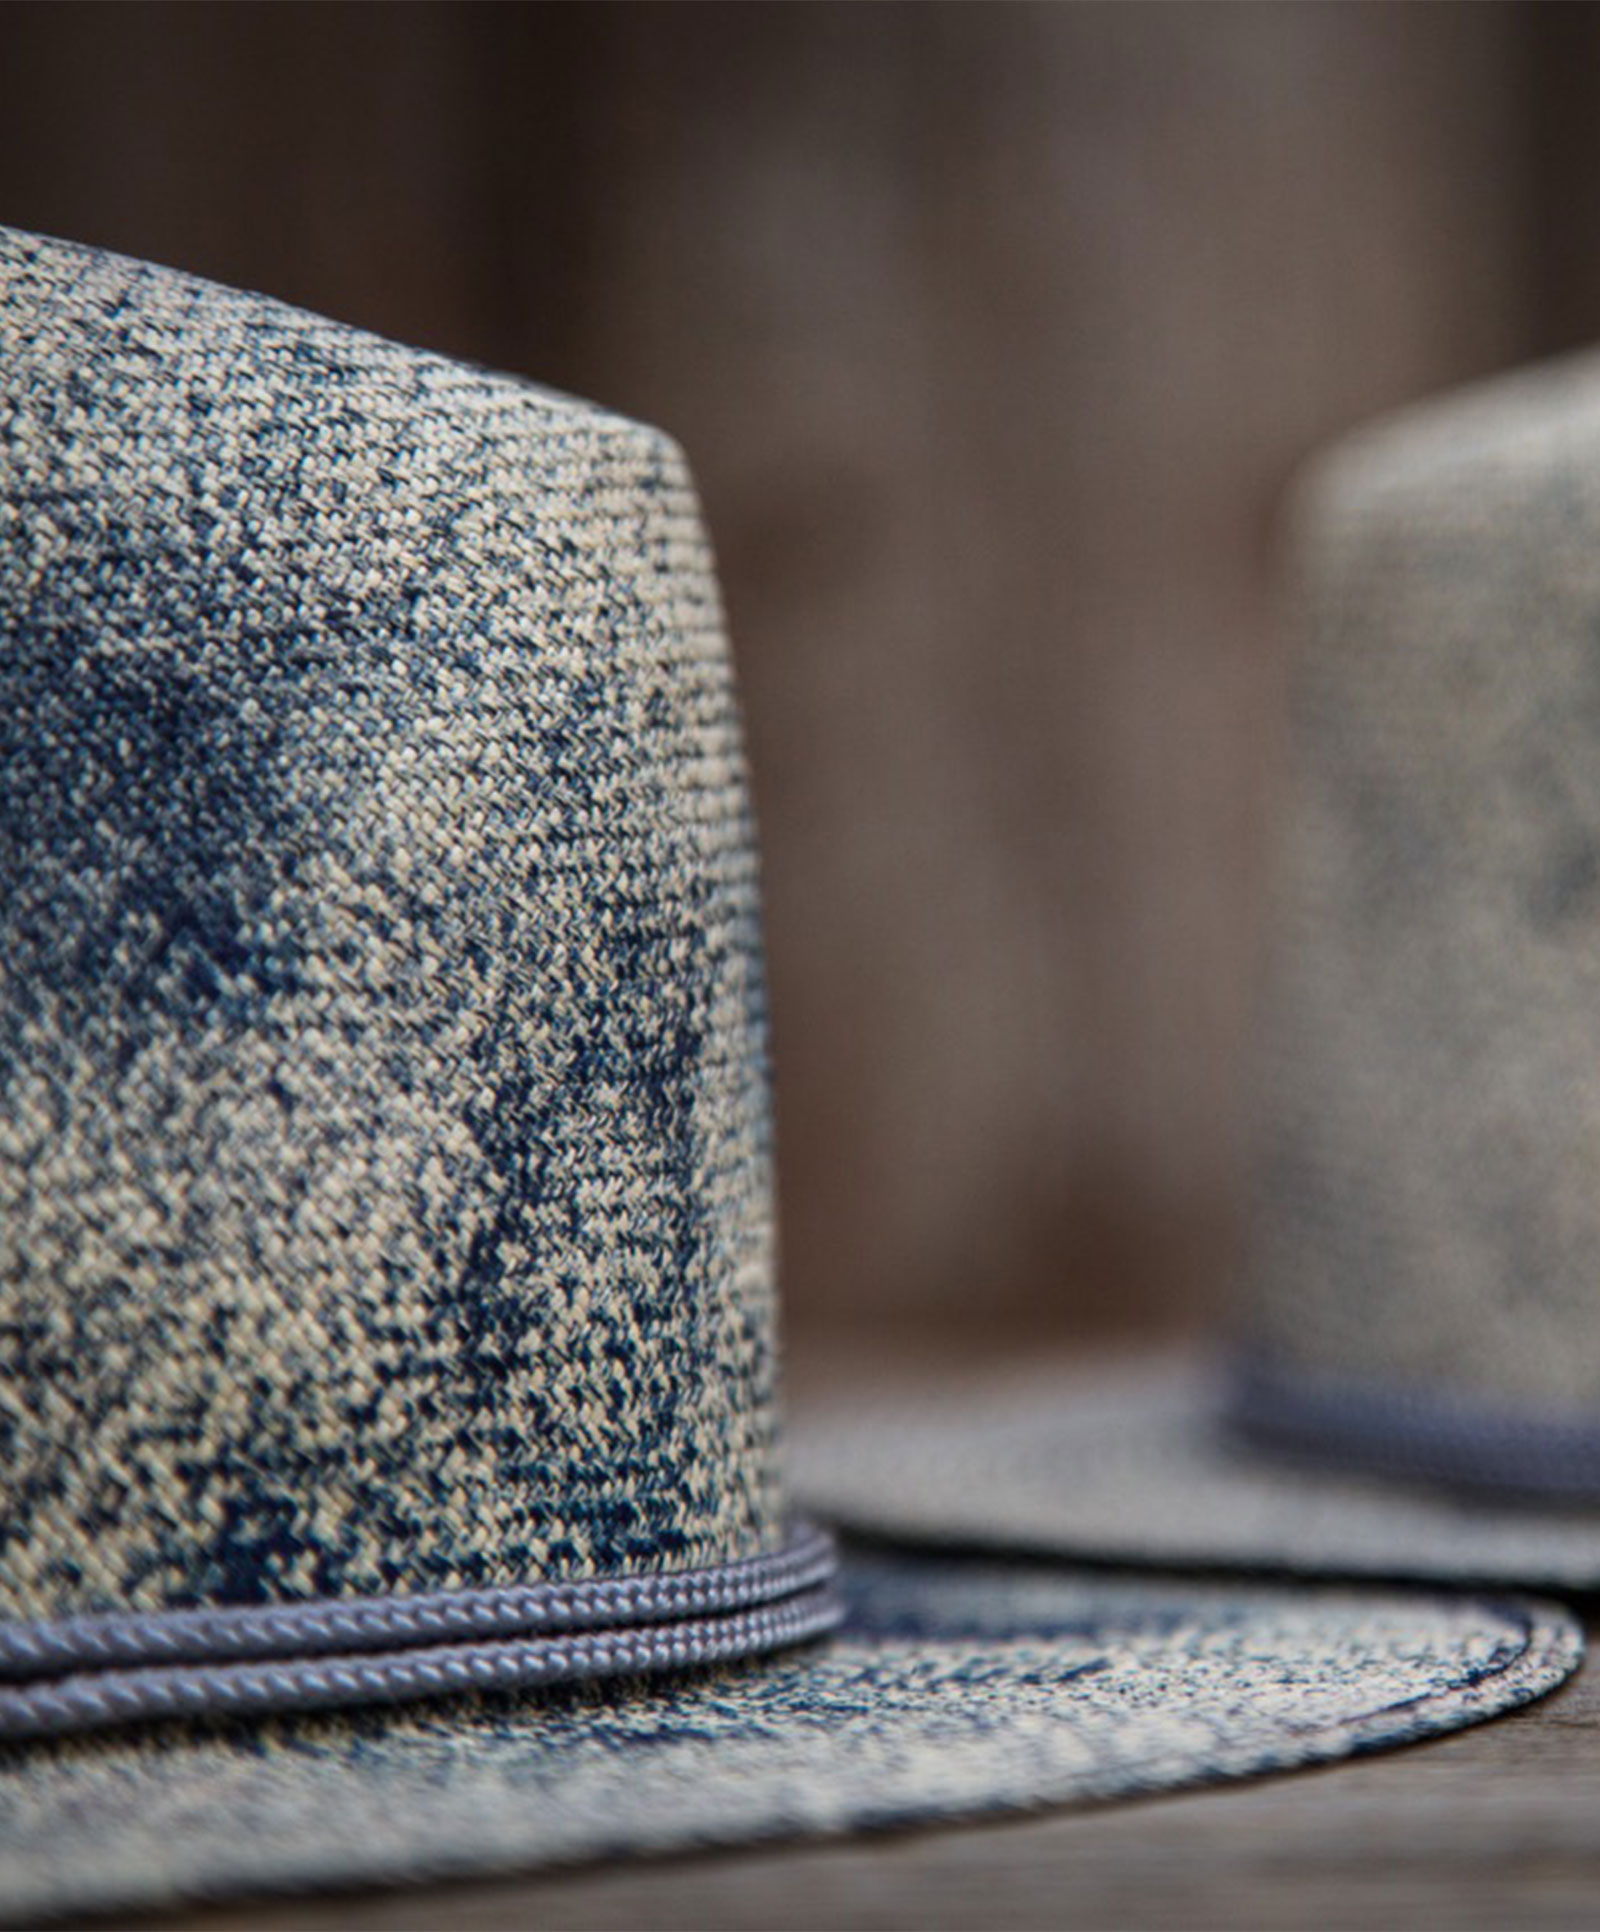 Design
Inspired by GERHARD RICHTER abstract paintings. The Gerhard is a custom Hand Dye Montecristi Straw. Depending on the quality of the weave, a Worth & Worth Montecristi Panama Hat can take several months to weave by our master weavers in Ecuador.
Material
Custom Hand Dye Montecristi Straw. Natural dyeing minimizes the harmful effects on the surrounding environment. Our custom hats are hand-dyed by using plant and vegetable based pigments.
Specifications
Our Montecristi Gerhard combines a 3 3/4 crown with a wearable brim (between 2 1/4 and 2 5/8). Trimmed with a hemp cord band and finished off with a handsome boating knot. Handmade in our atelier in NYC.Please allow 6-8 weeks to custom make this special piece.